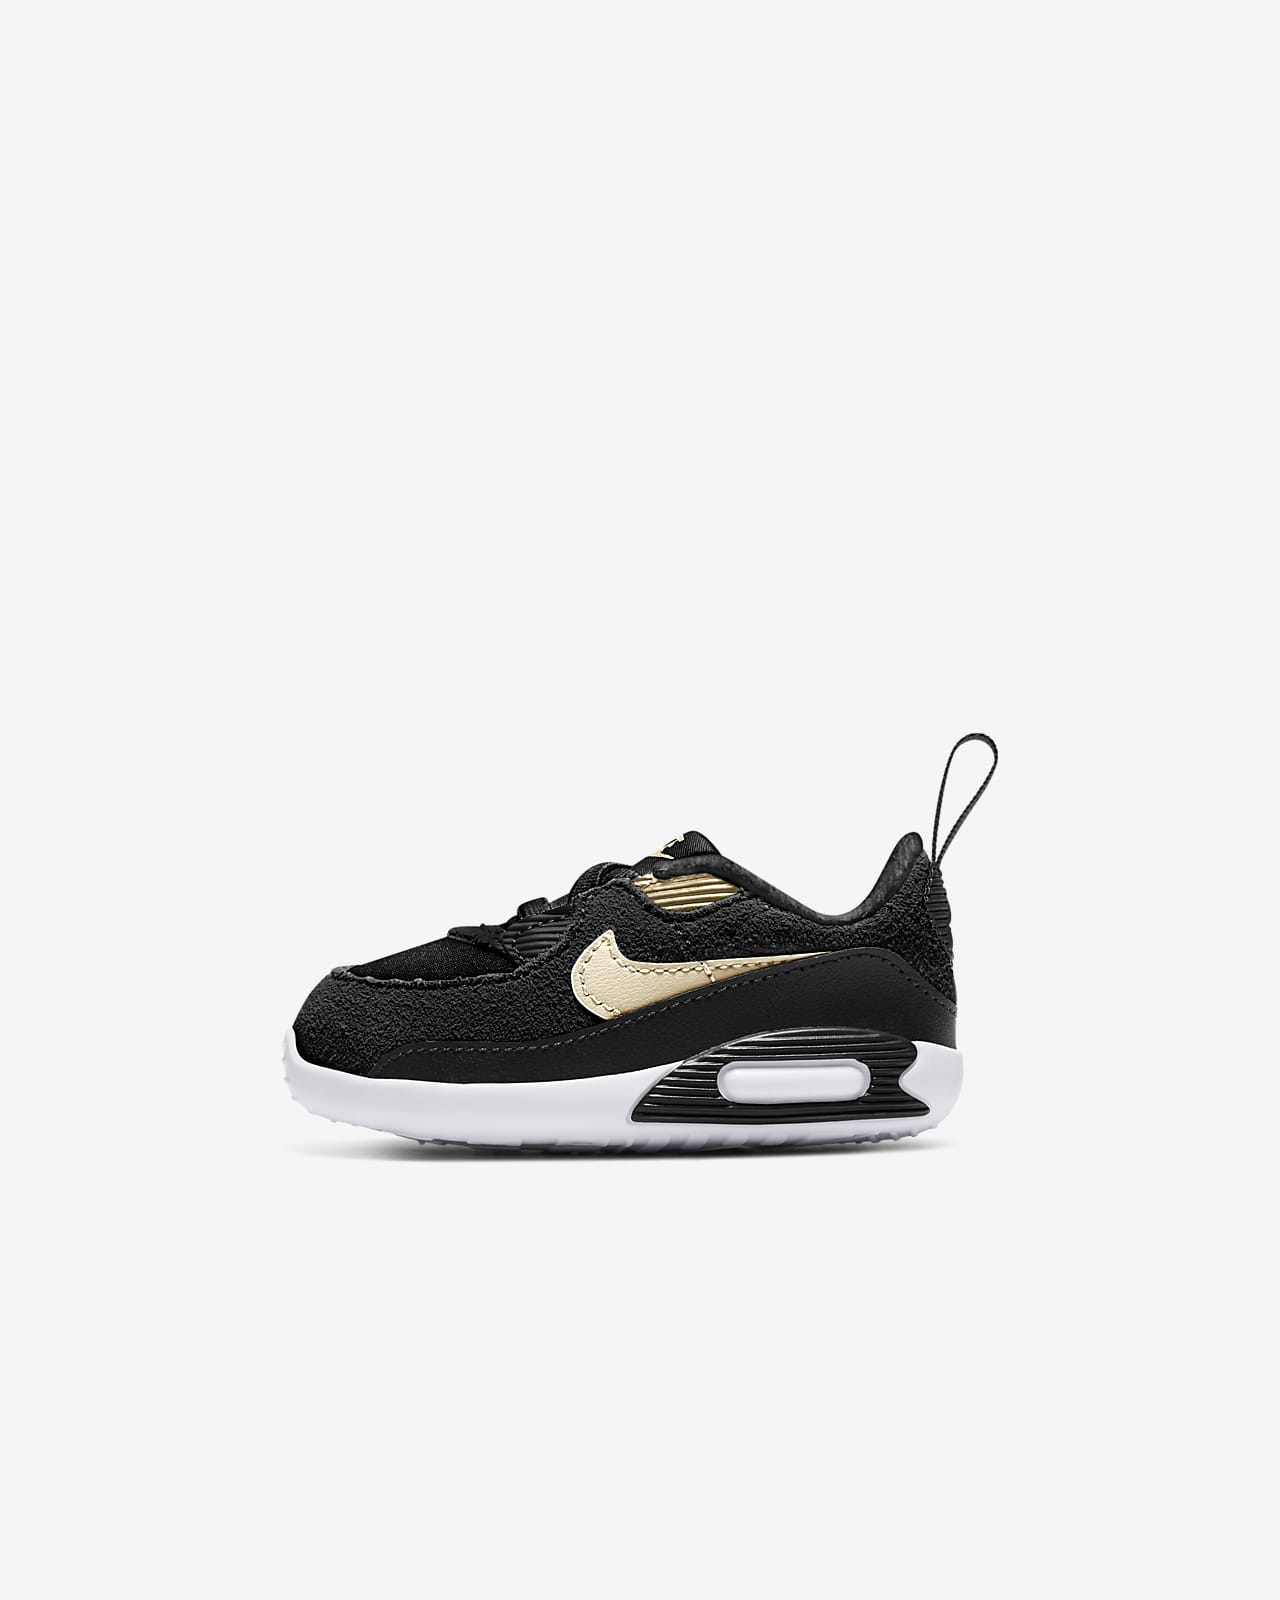 nike copy shoes price